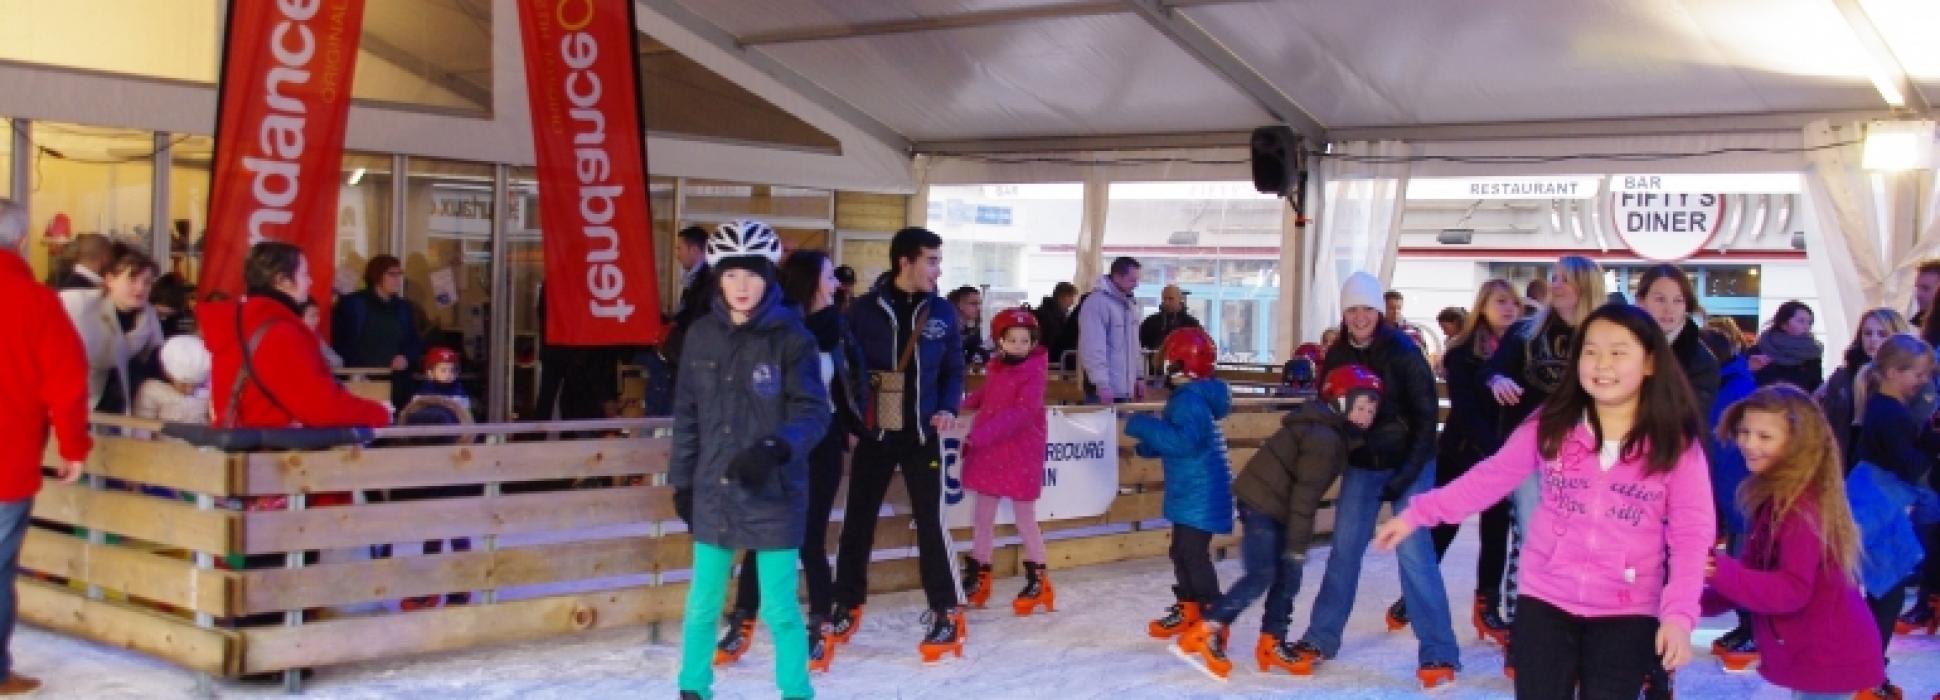 The skating rink and sledge slope are again in the city center of Cherbourg for Christmas